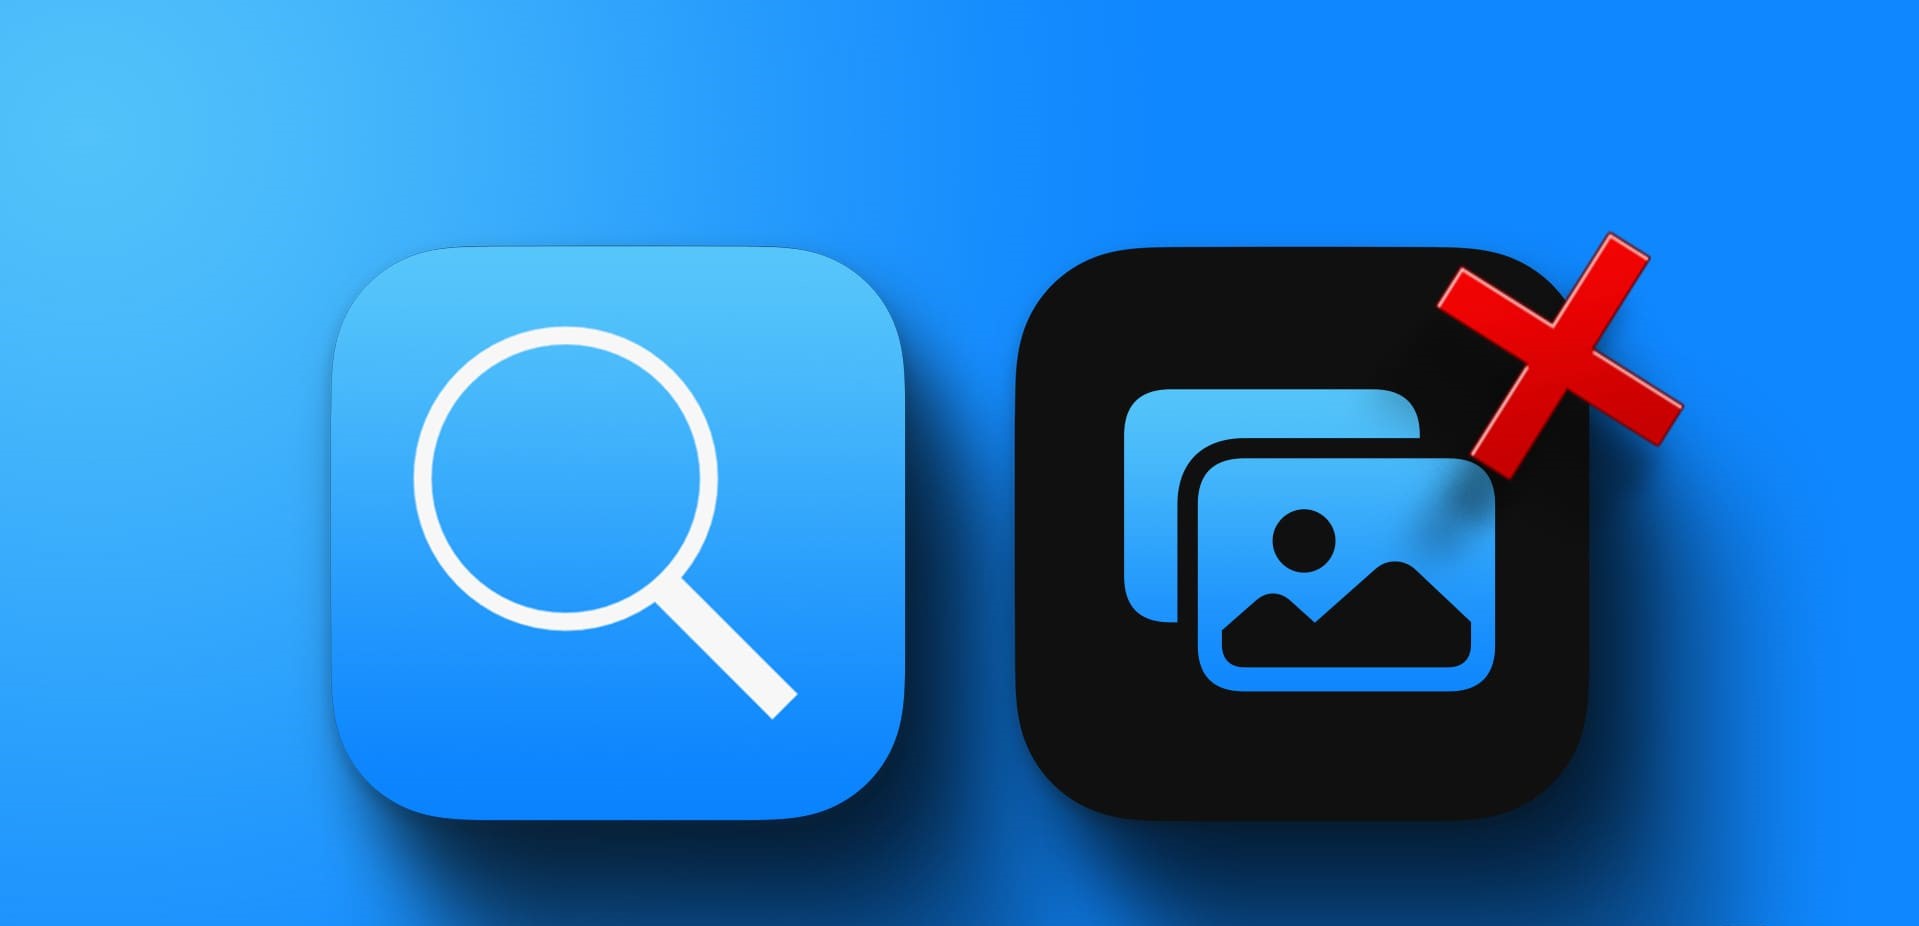 How To Remove Photos From Spotlight Search On IPhone